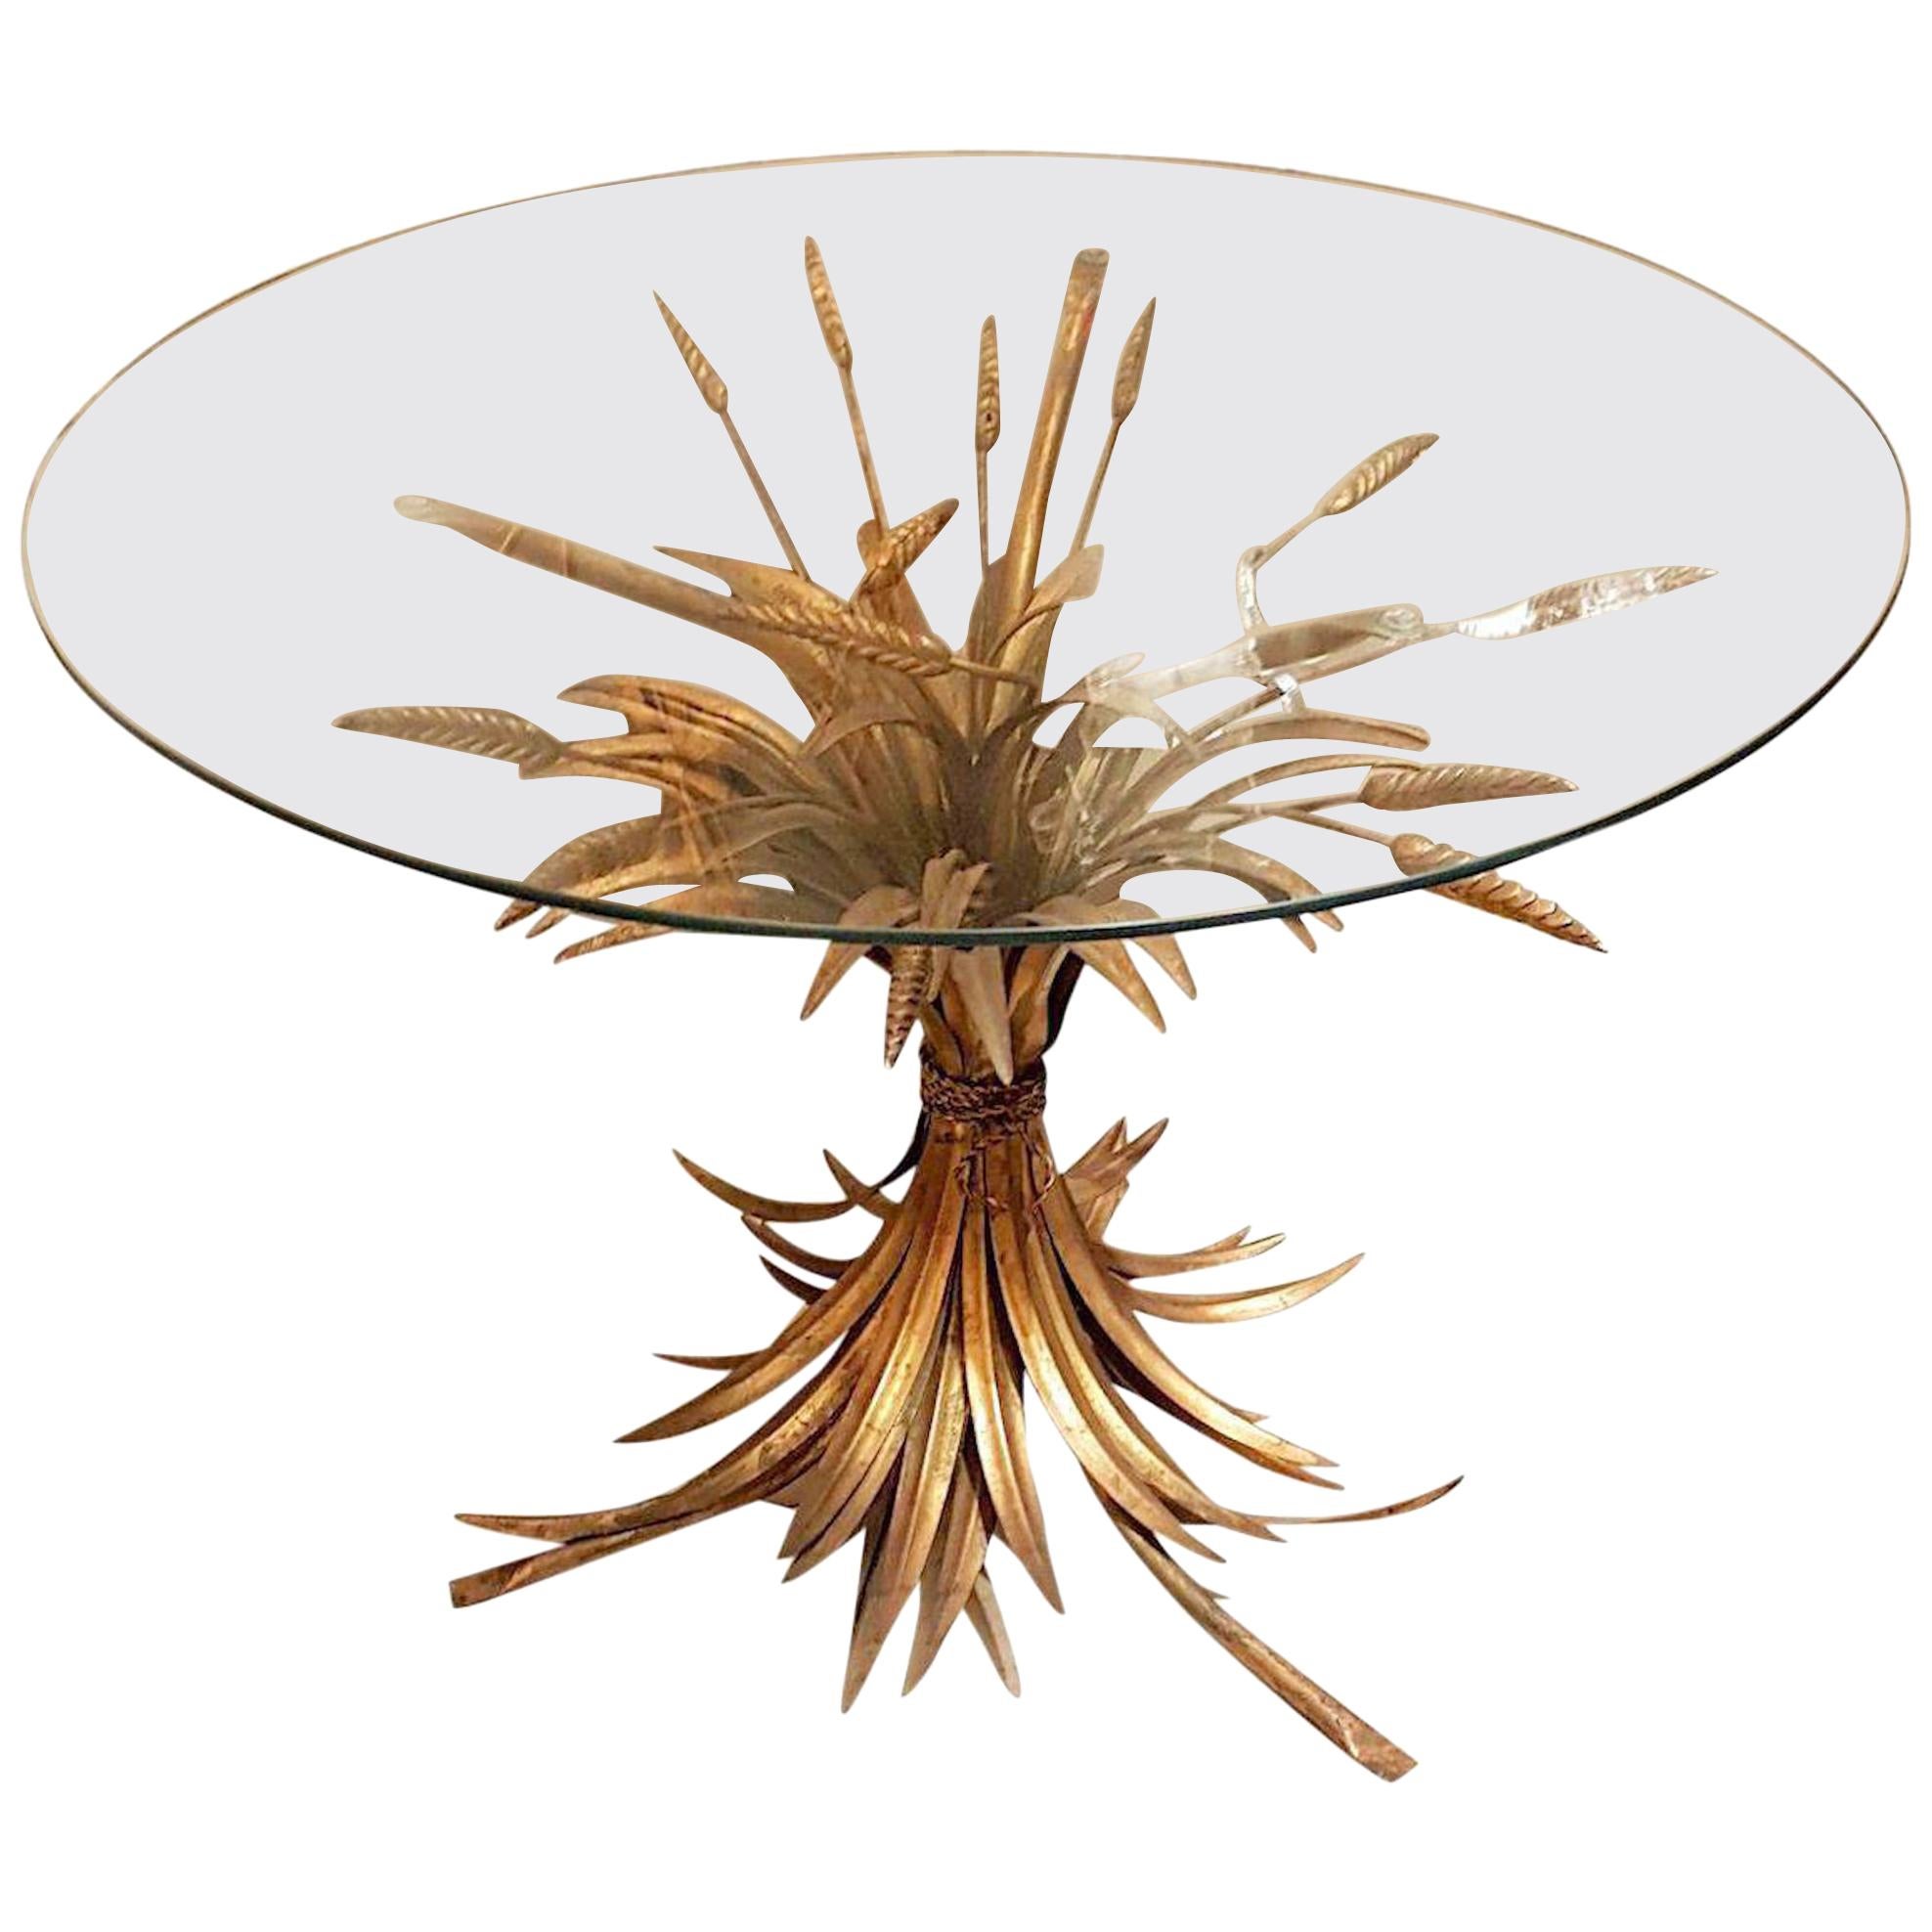 French Mid-Century Modern Gilt Wheat Leaf Coffee/Side Table, Coco Chanel Style